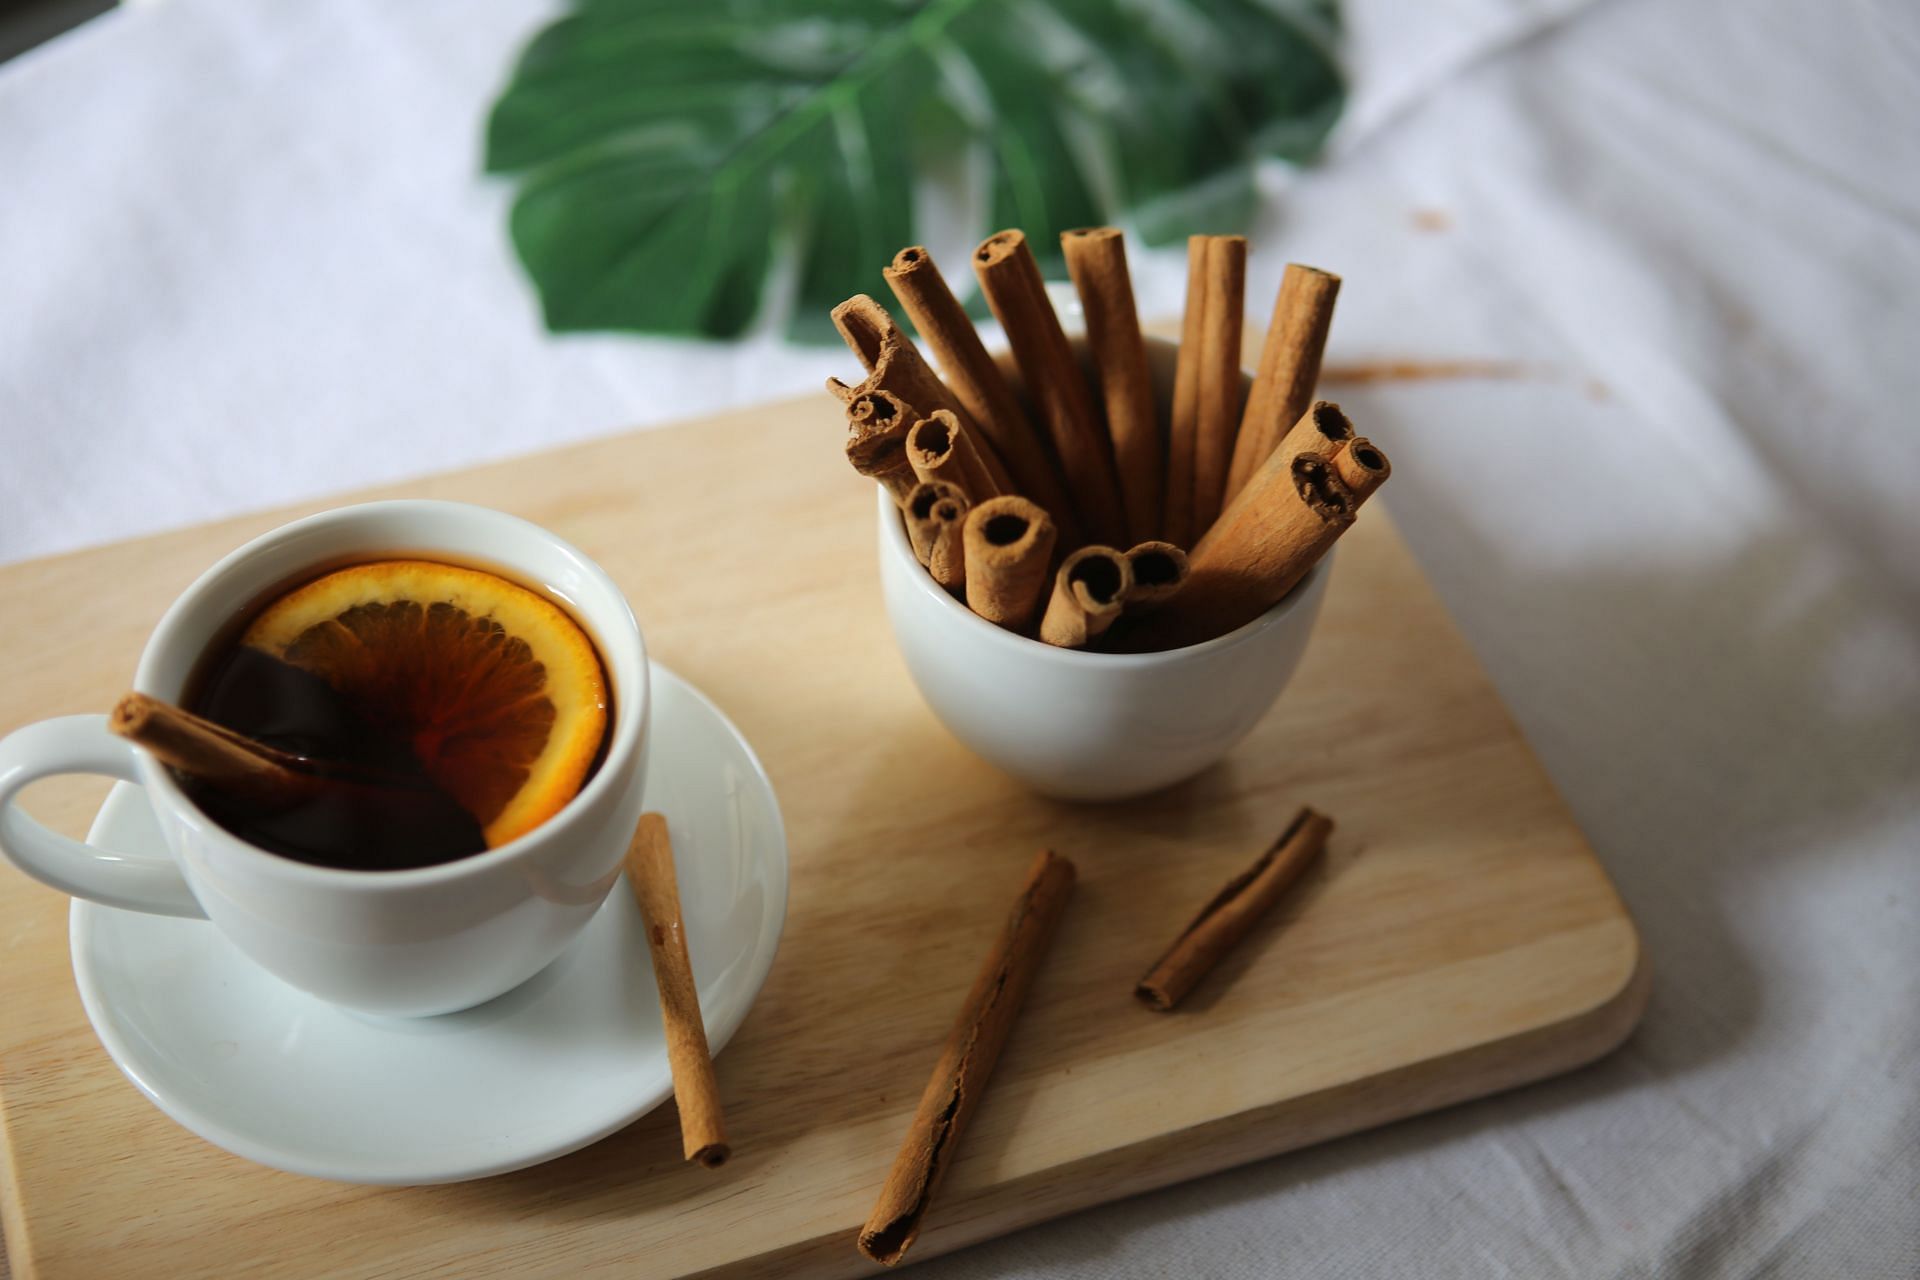 Cinnamon to lose belly fat. (Image via Pexels/Ngo Trong An)